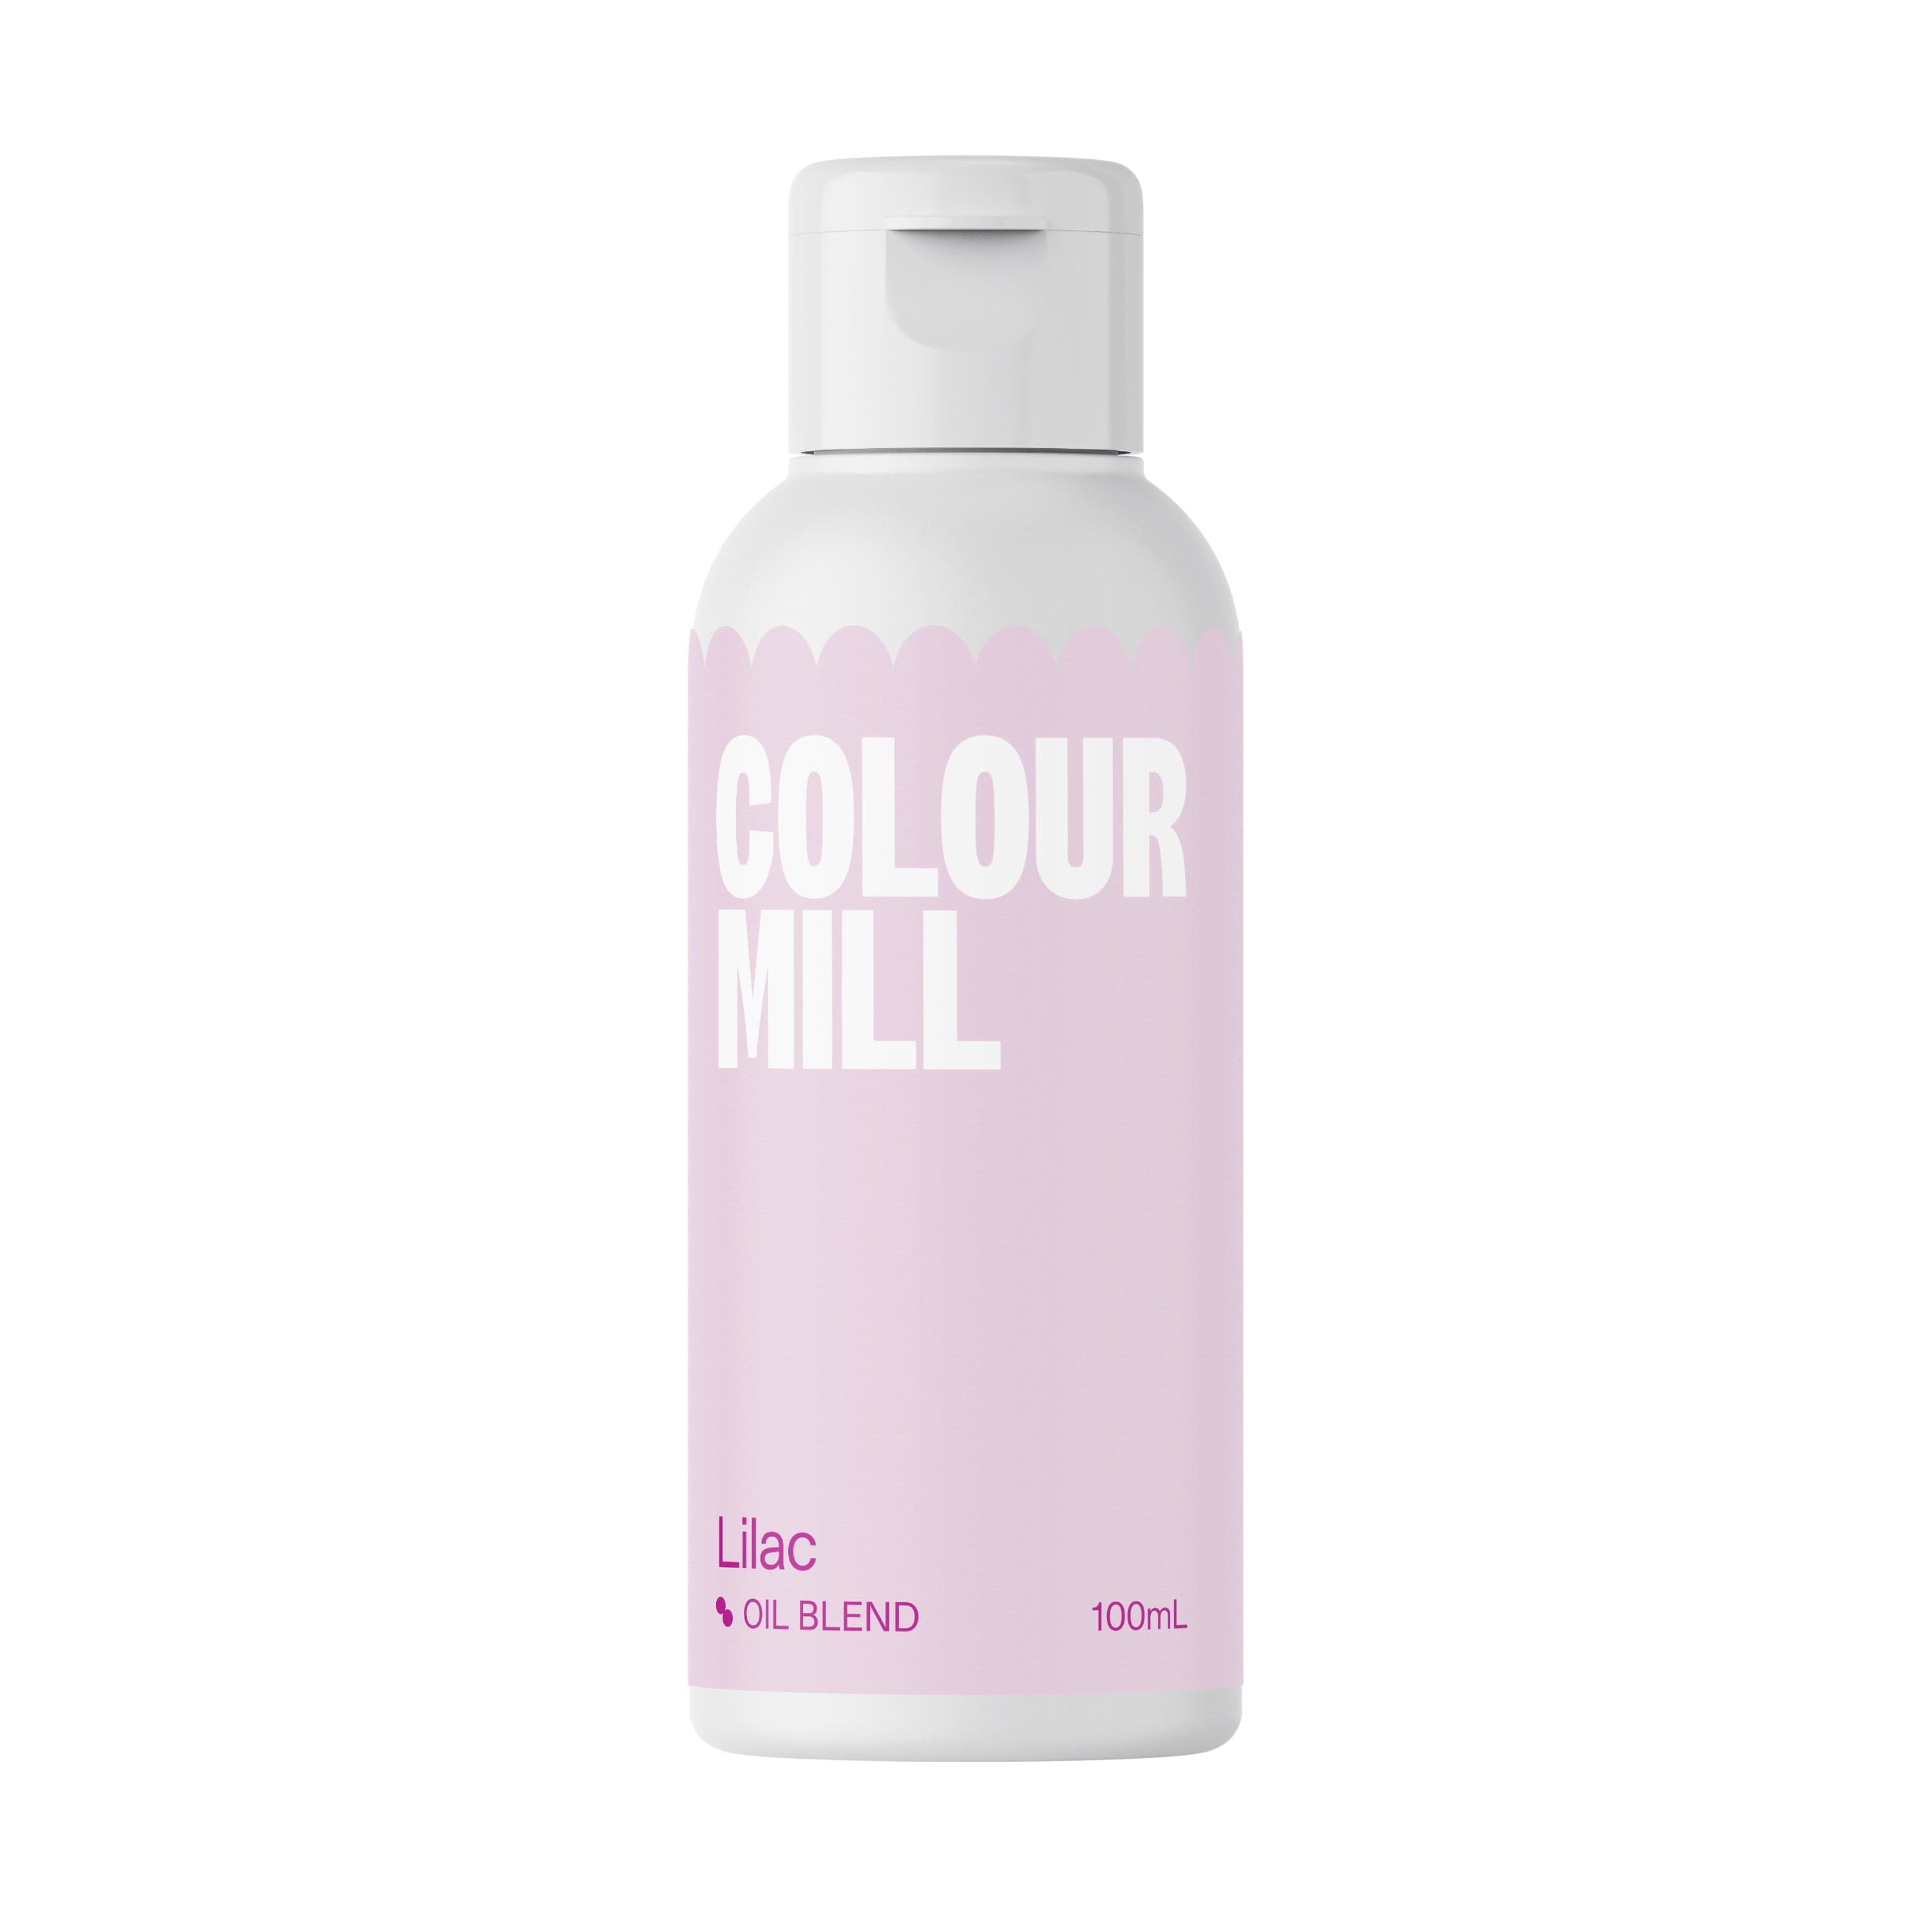 Happy Sprinkles Streusel Colour Mill Lilac - Oil Blend